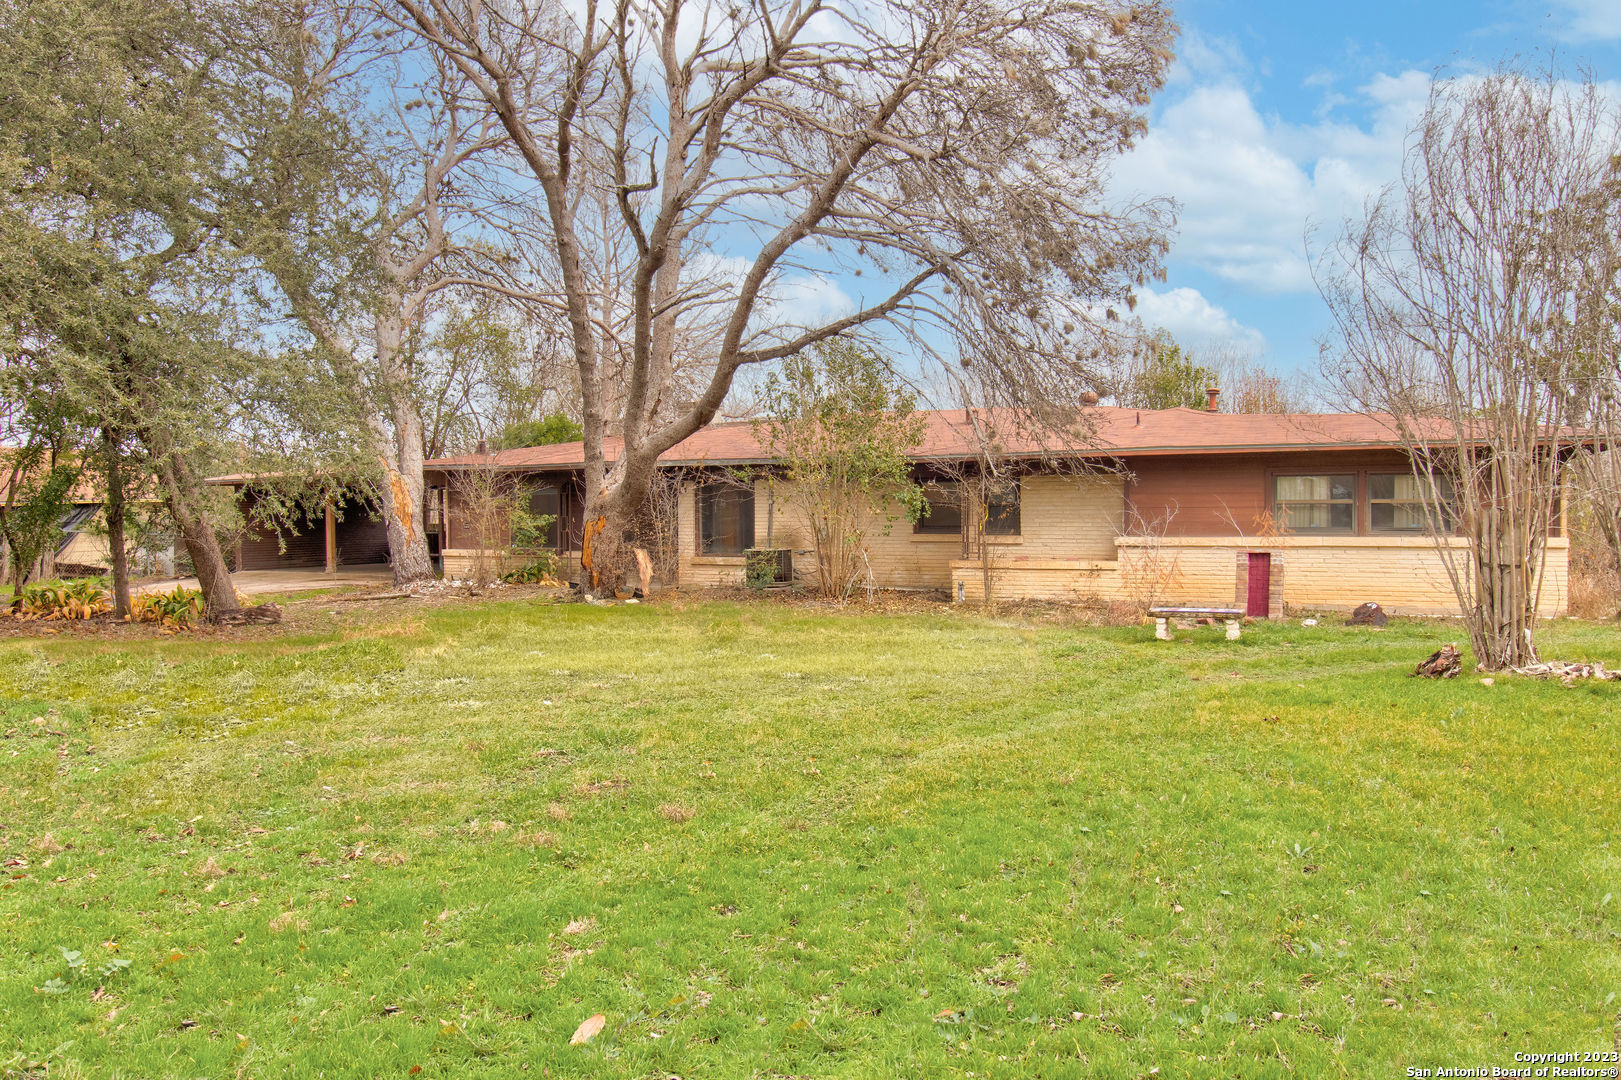 Investors and developers take notice! This rare 2 acre property offers a unique opportunity to transform a fixer upper into a desirable multifamily housing complex. This 3 bedroom, 2 bathroom home is a handyman special loaded with features. Home has a fireplace, office, and gorgeous saltillo tile throughout the common areas. Don't miss out on this diamond in the rough with motivated sellers! Located in the Donaldson Terrace neighborhood this property provides the perfect foundation for an investor to create their dream project. This unique and valuable find in a prime location where acreage is scarce! Schedule a tour today and take the first step towards realizing your investment goals.